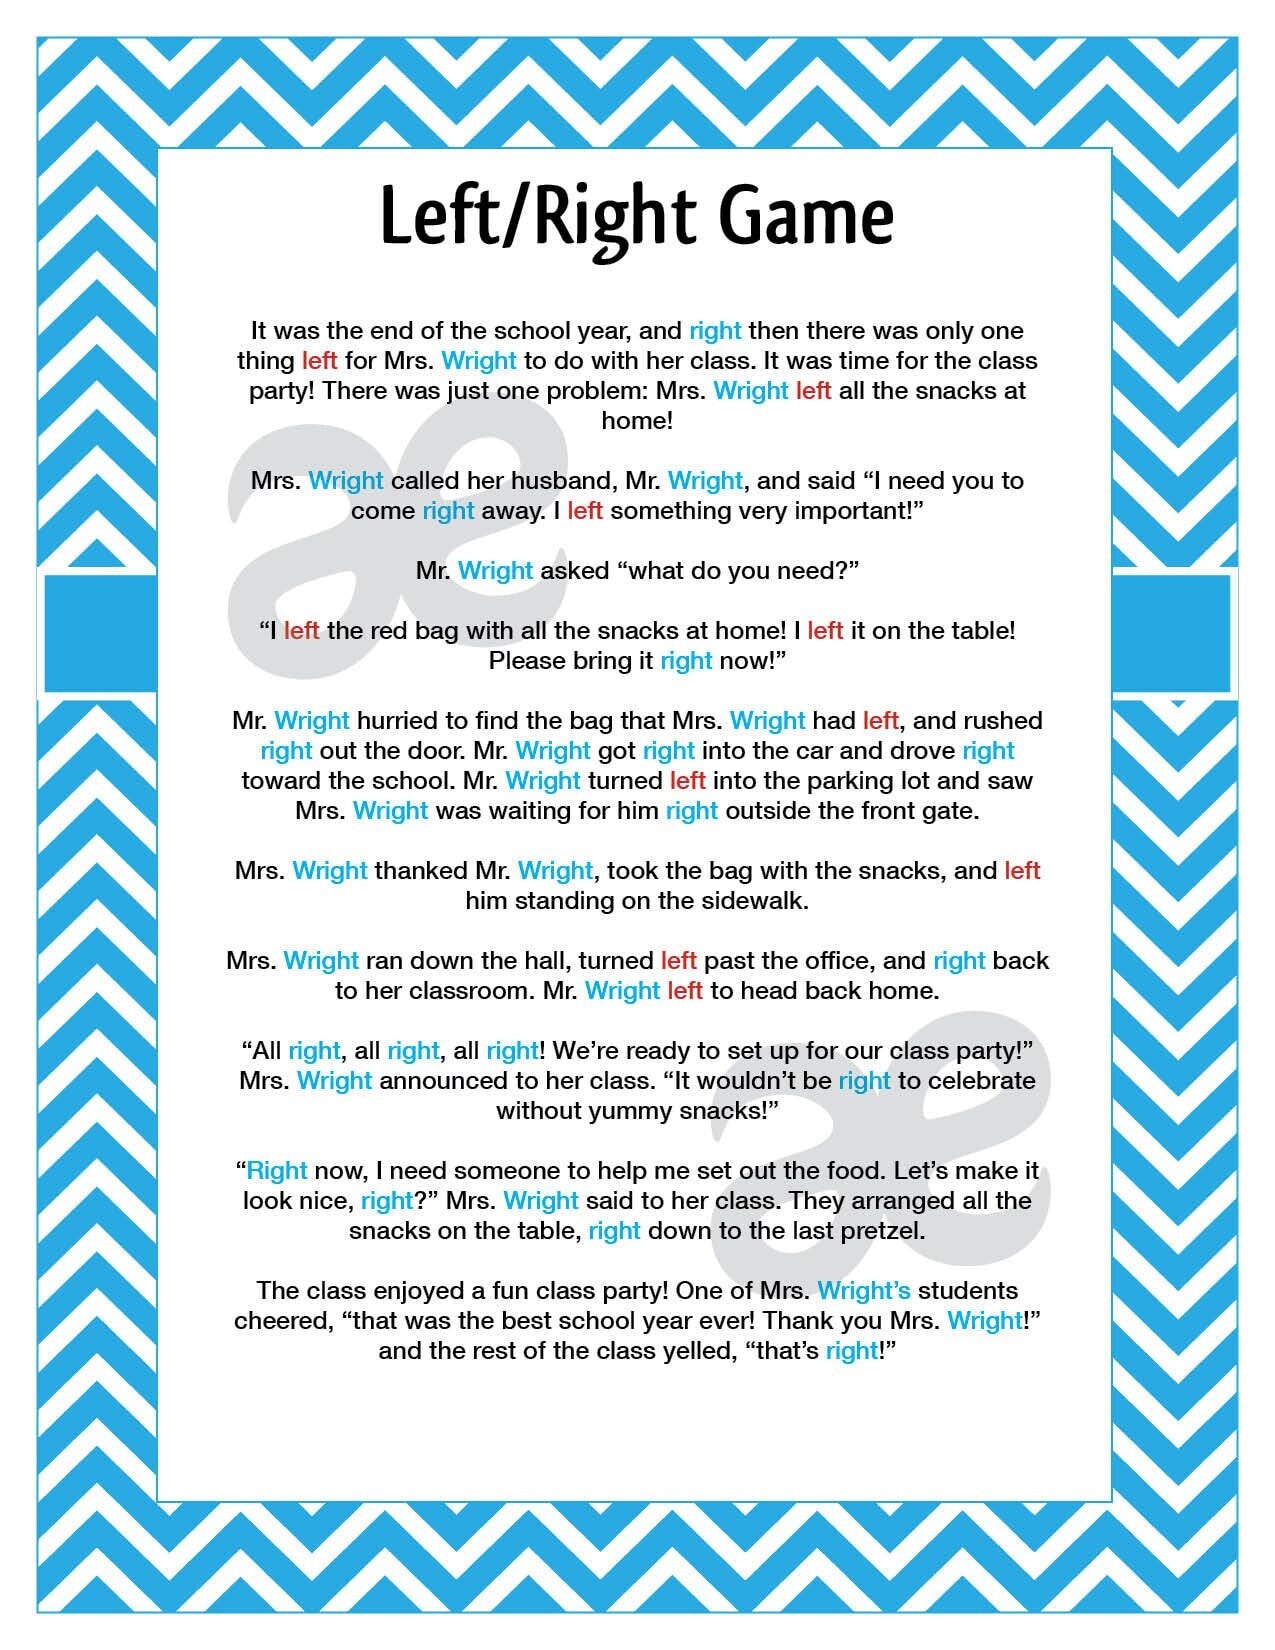 printable-end-of-school-game-left-right-game-instant-etsy